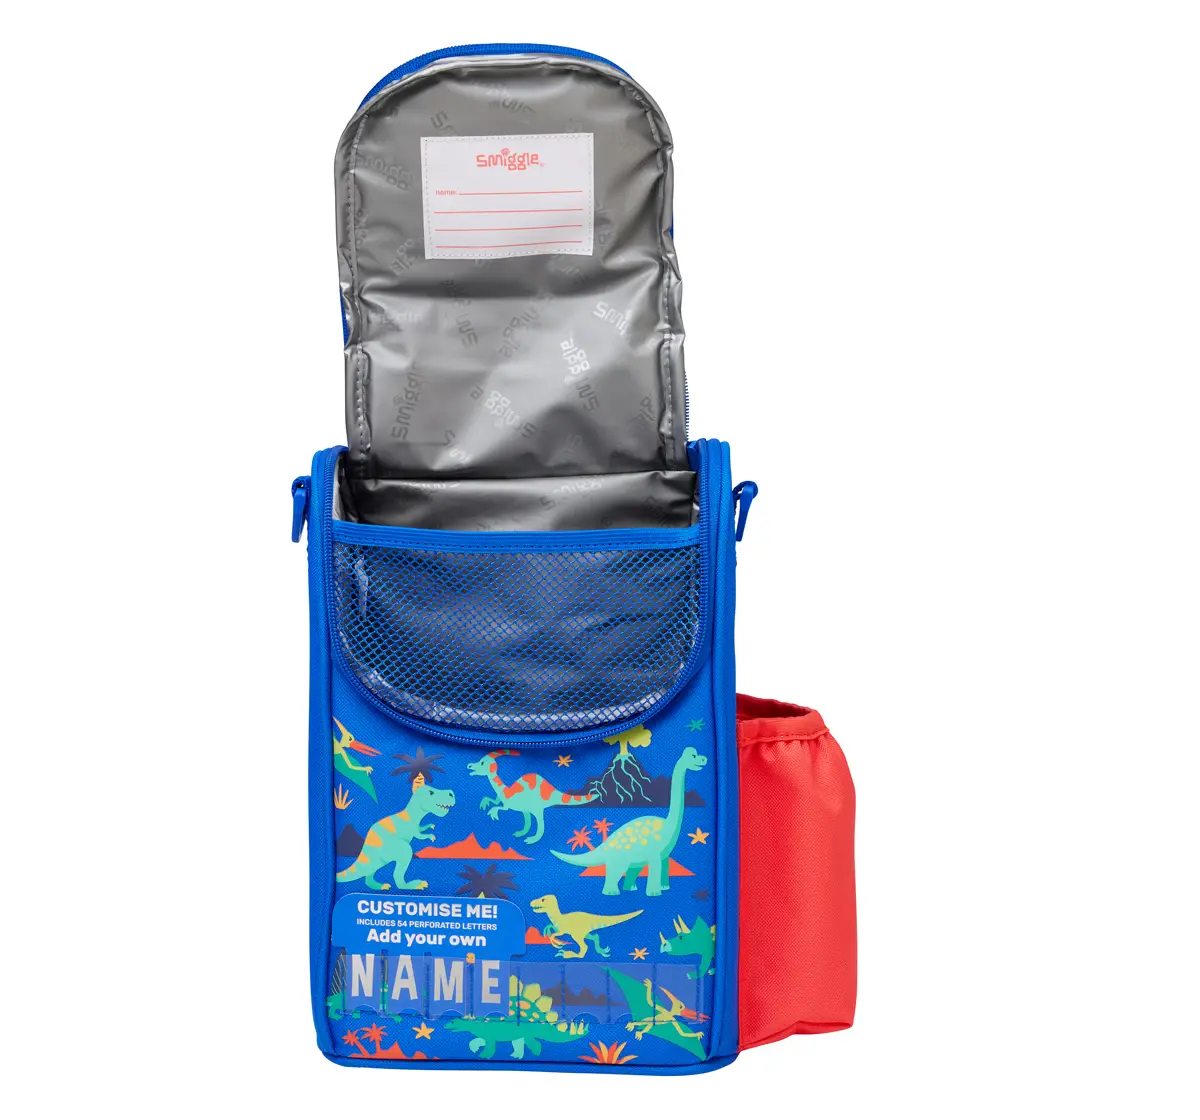 Smiggle Movin' Lunch Box With Strap, Blue, 3Y+